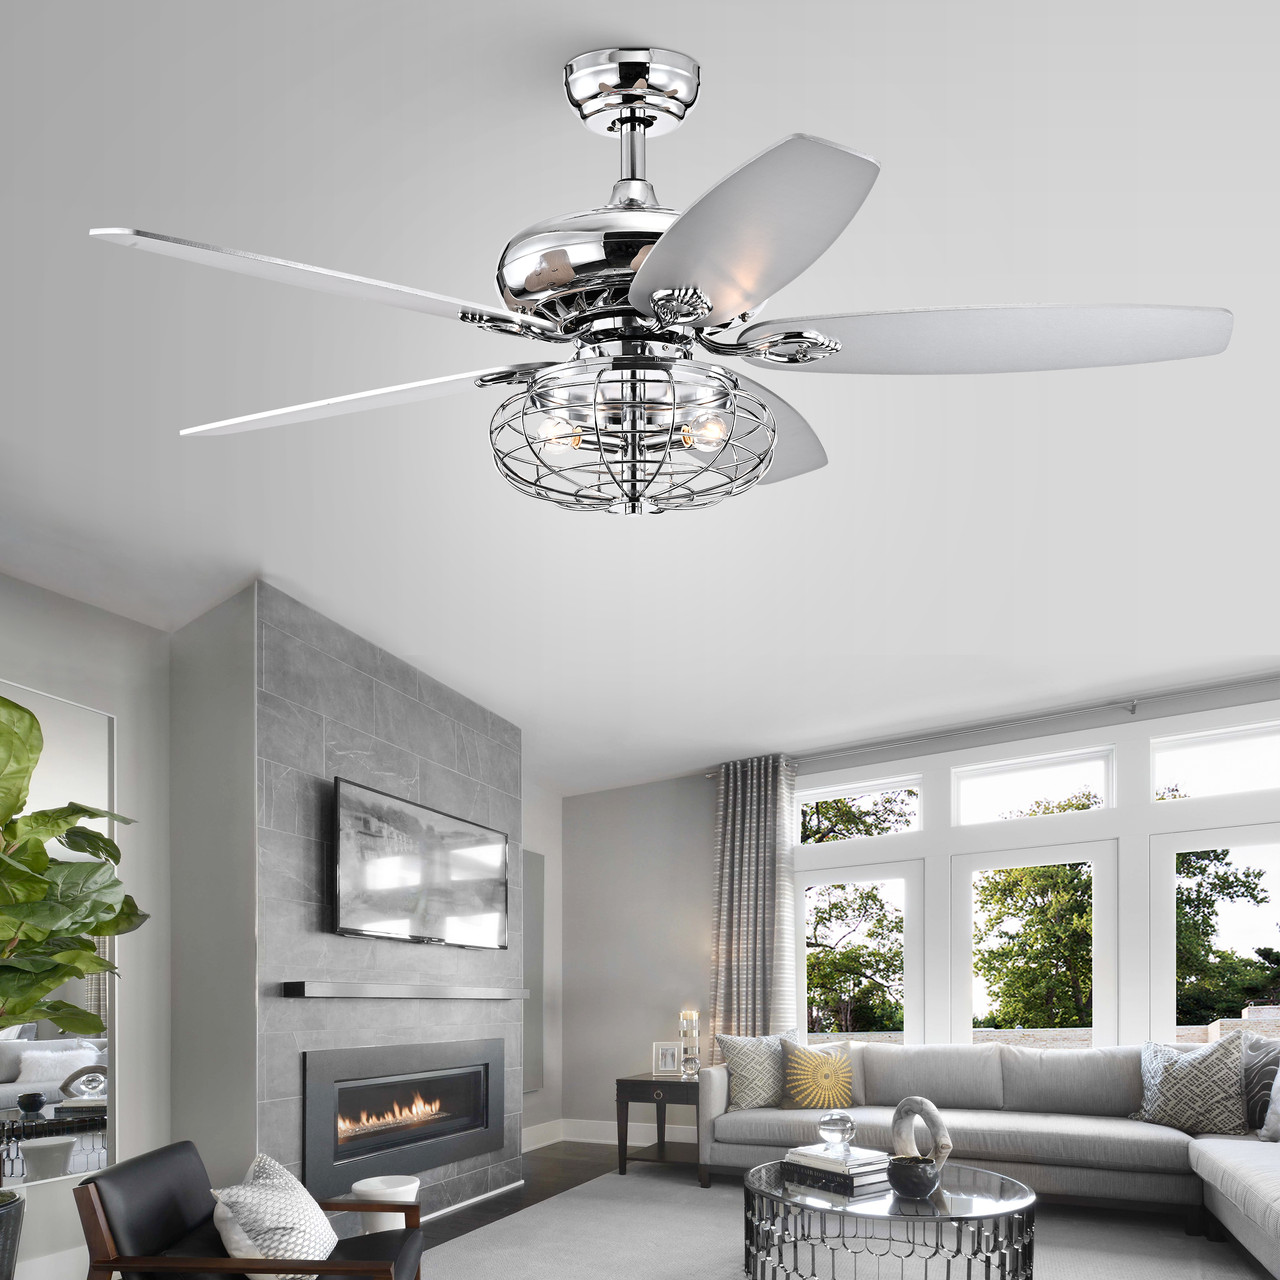 WAREHOUSE OF TIFFANY'S CFL-8434REMO/CH Chi 52 in. 2-Light Indoor Chrome Finish Remote Controlled Ceiling Fan with Light Kit